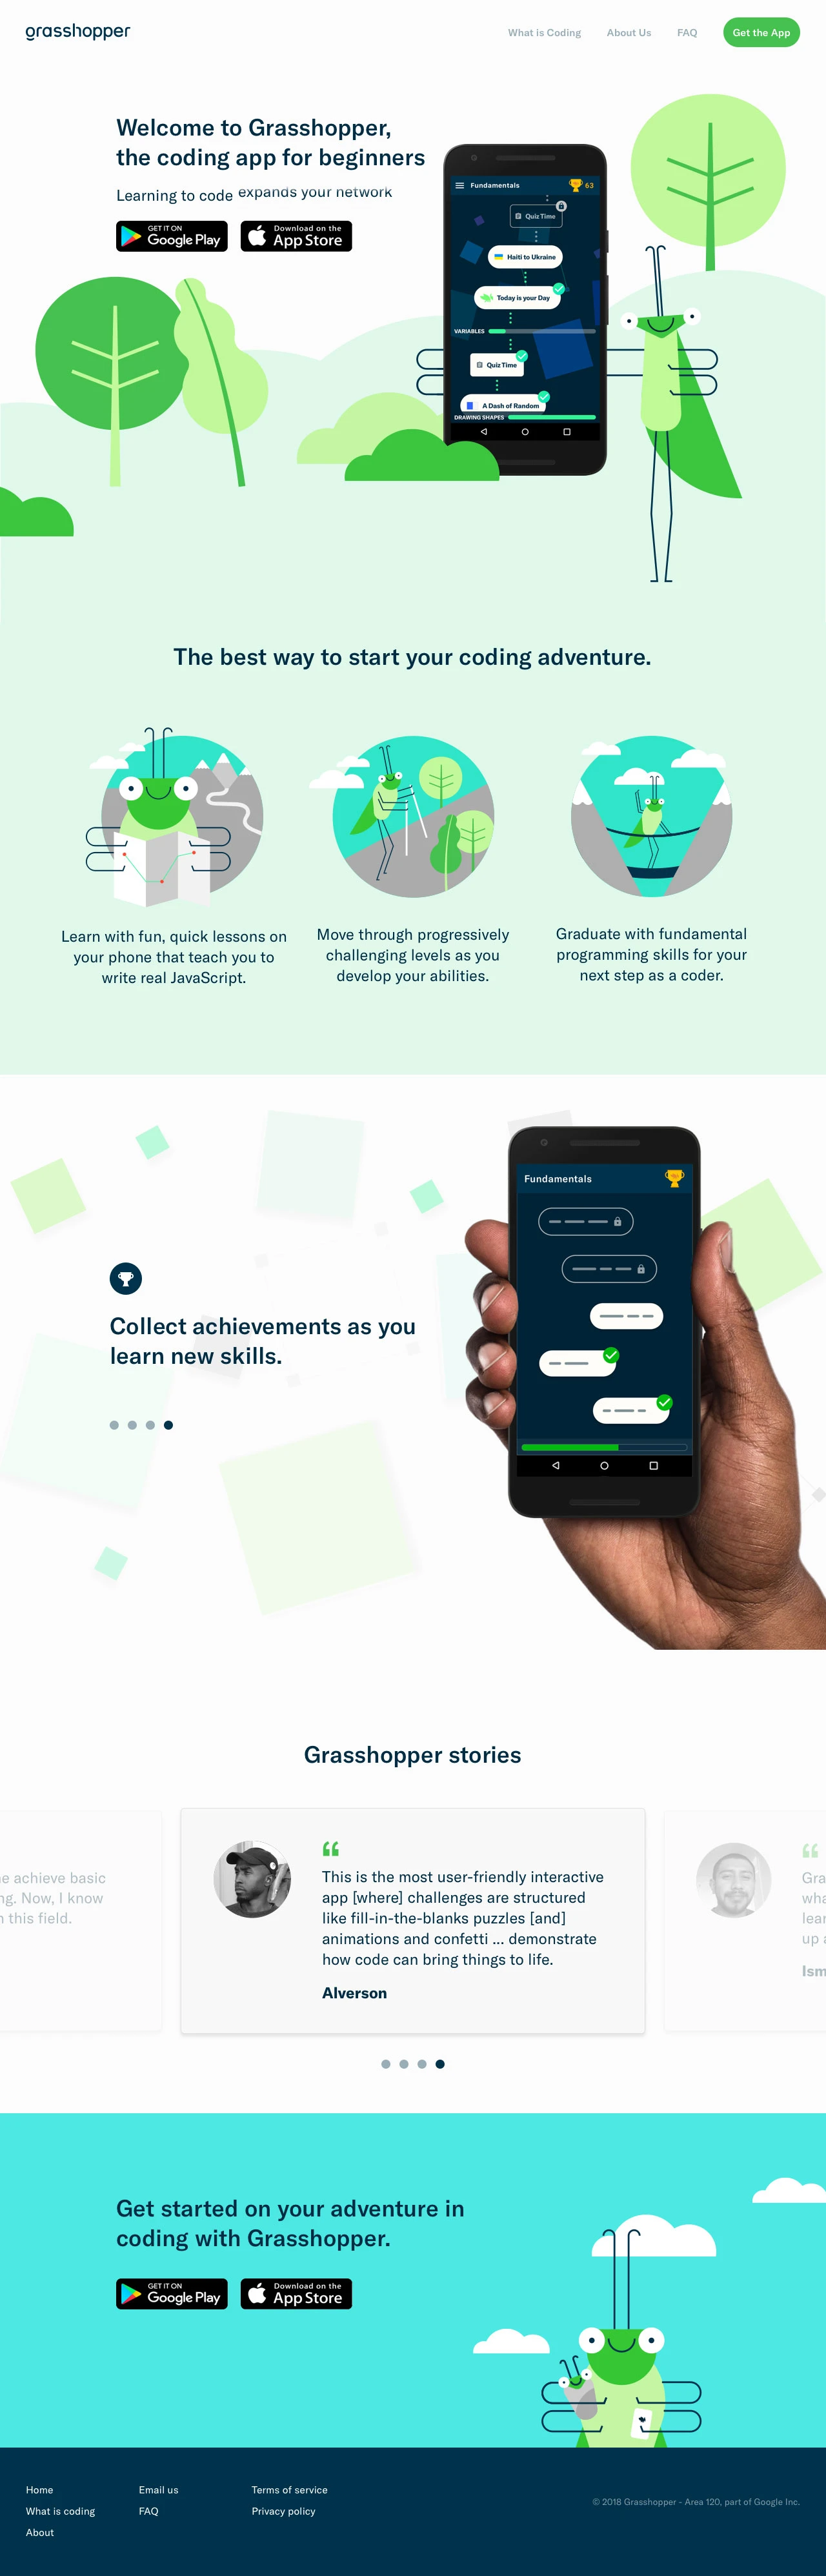 Grasshopper Landing Page Example: Grasshopper is the coding app for beginners. With fun, quick lessons on your phone, the app teaches adult learners to write real JavaScript.